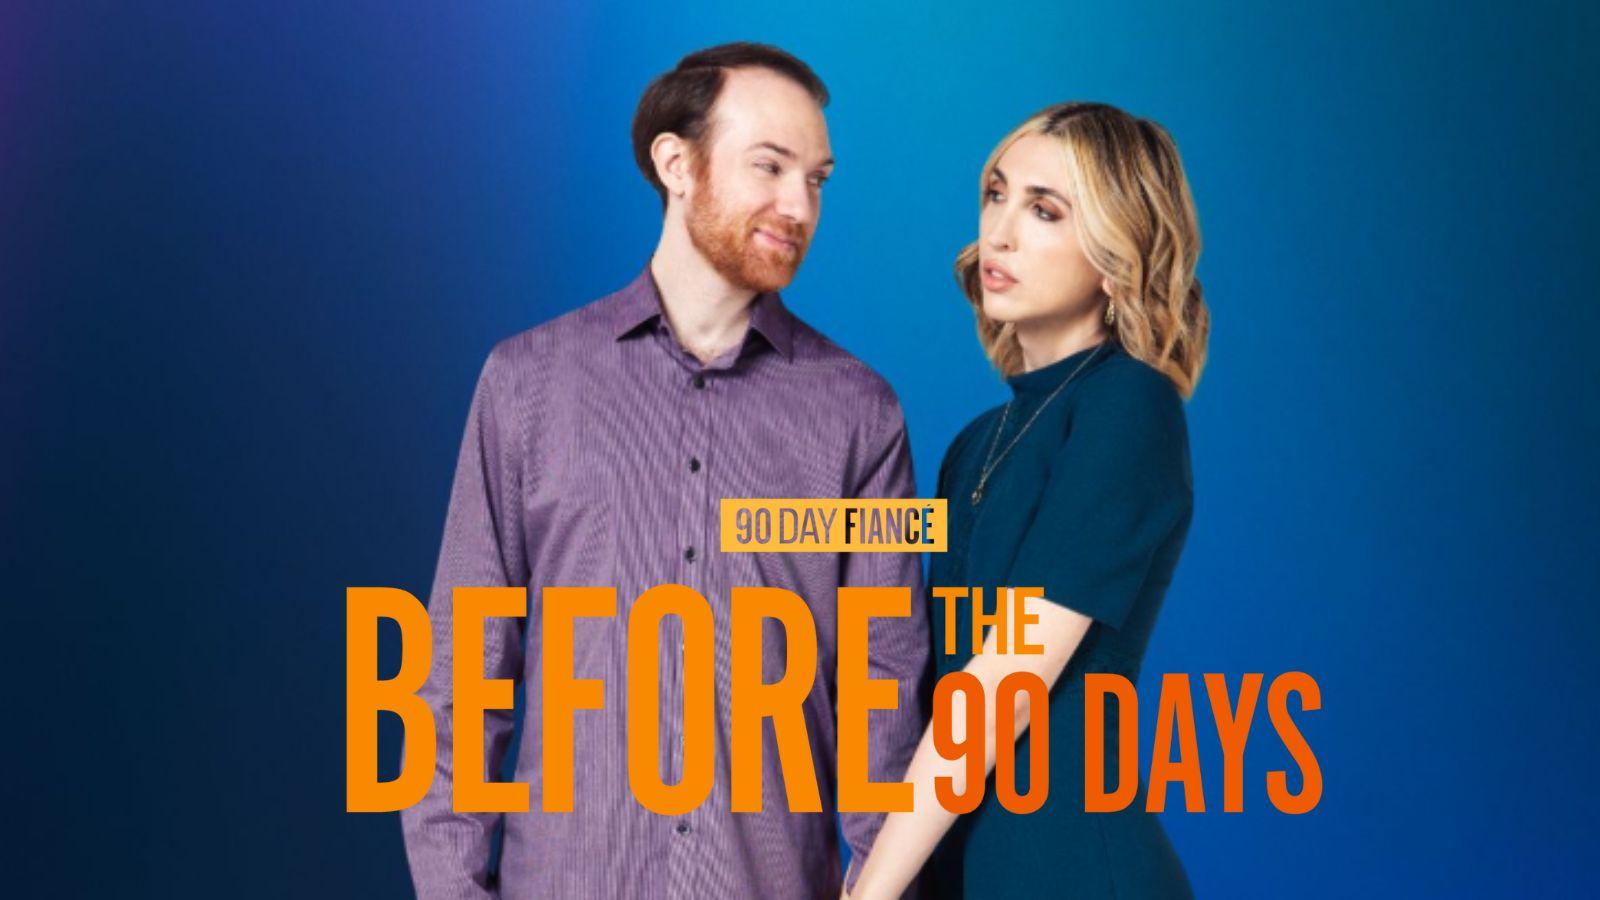 How to watch TLC's '90 Day Fiancé: Before the 90 Days' season 6